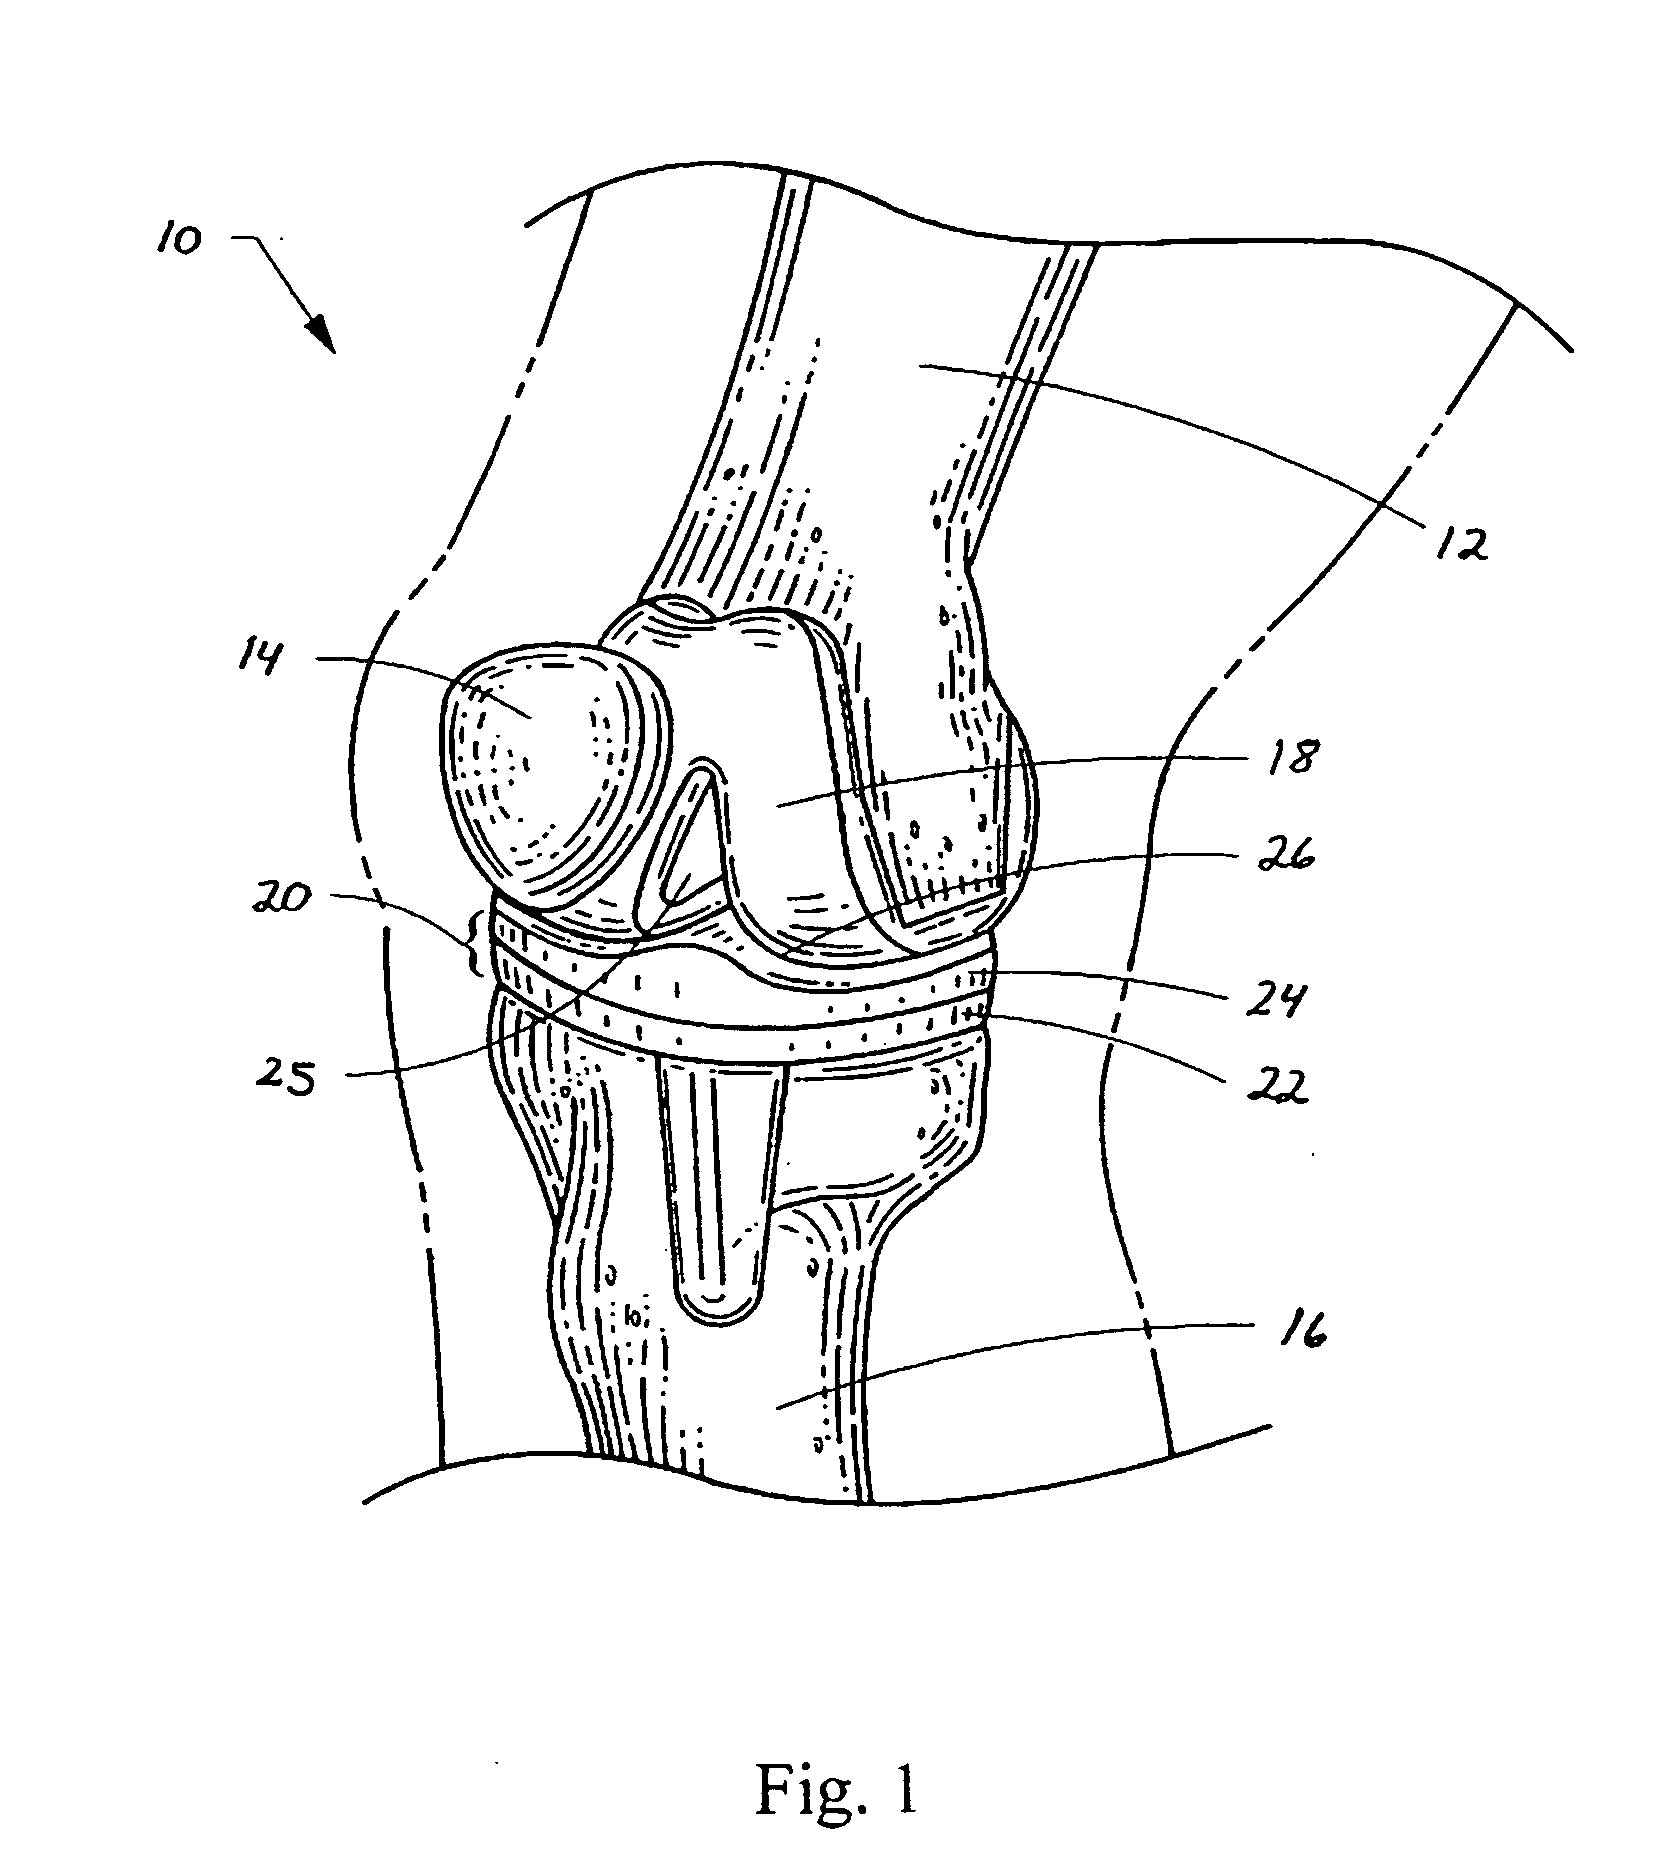 Device and method of spacer and trial design during joint arthroplasty